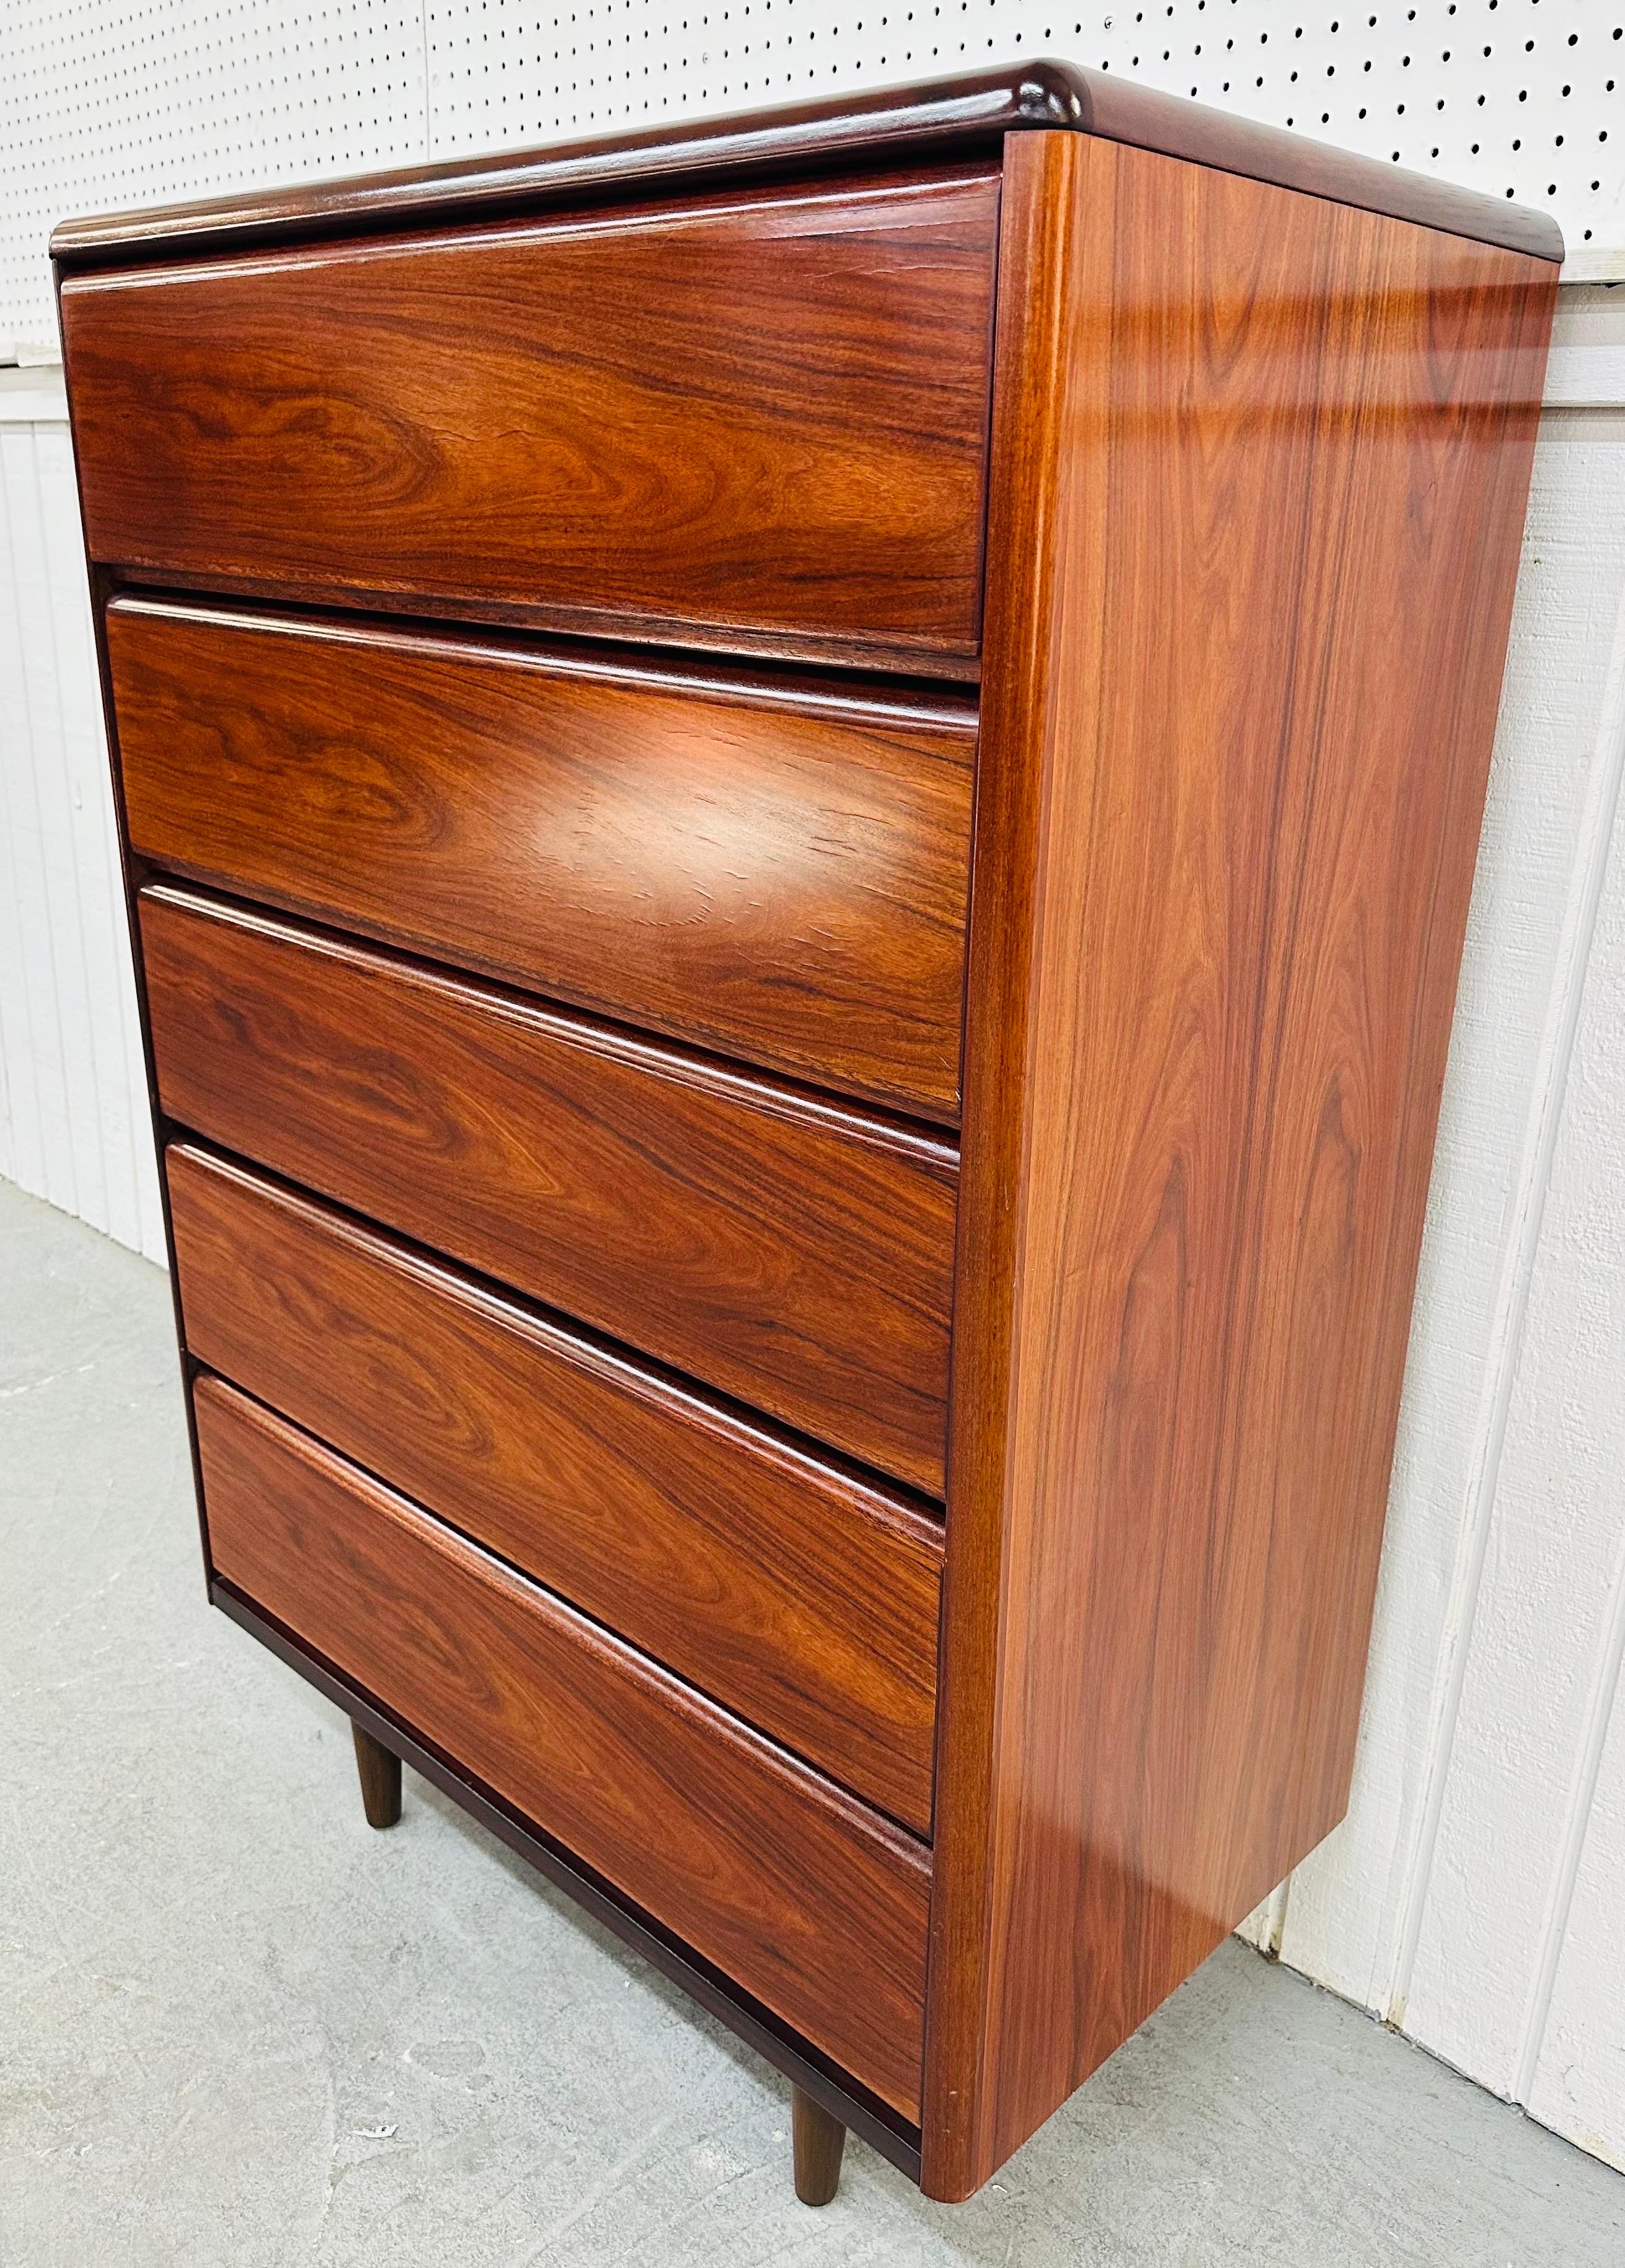 This listing is for a Vintage Danish Modern Rosewood High Chest. Featuring a straight line design, five drawers for storage, modern legs, and a beautiful rosewood finish. This is an exceptional combination of quality and design by Skovby!